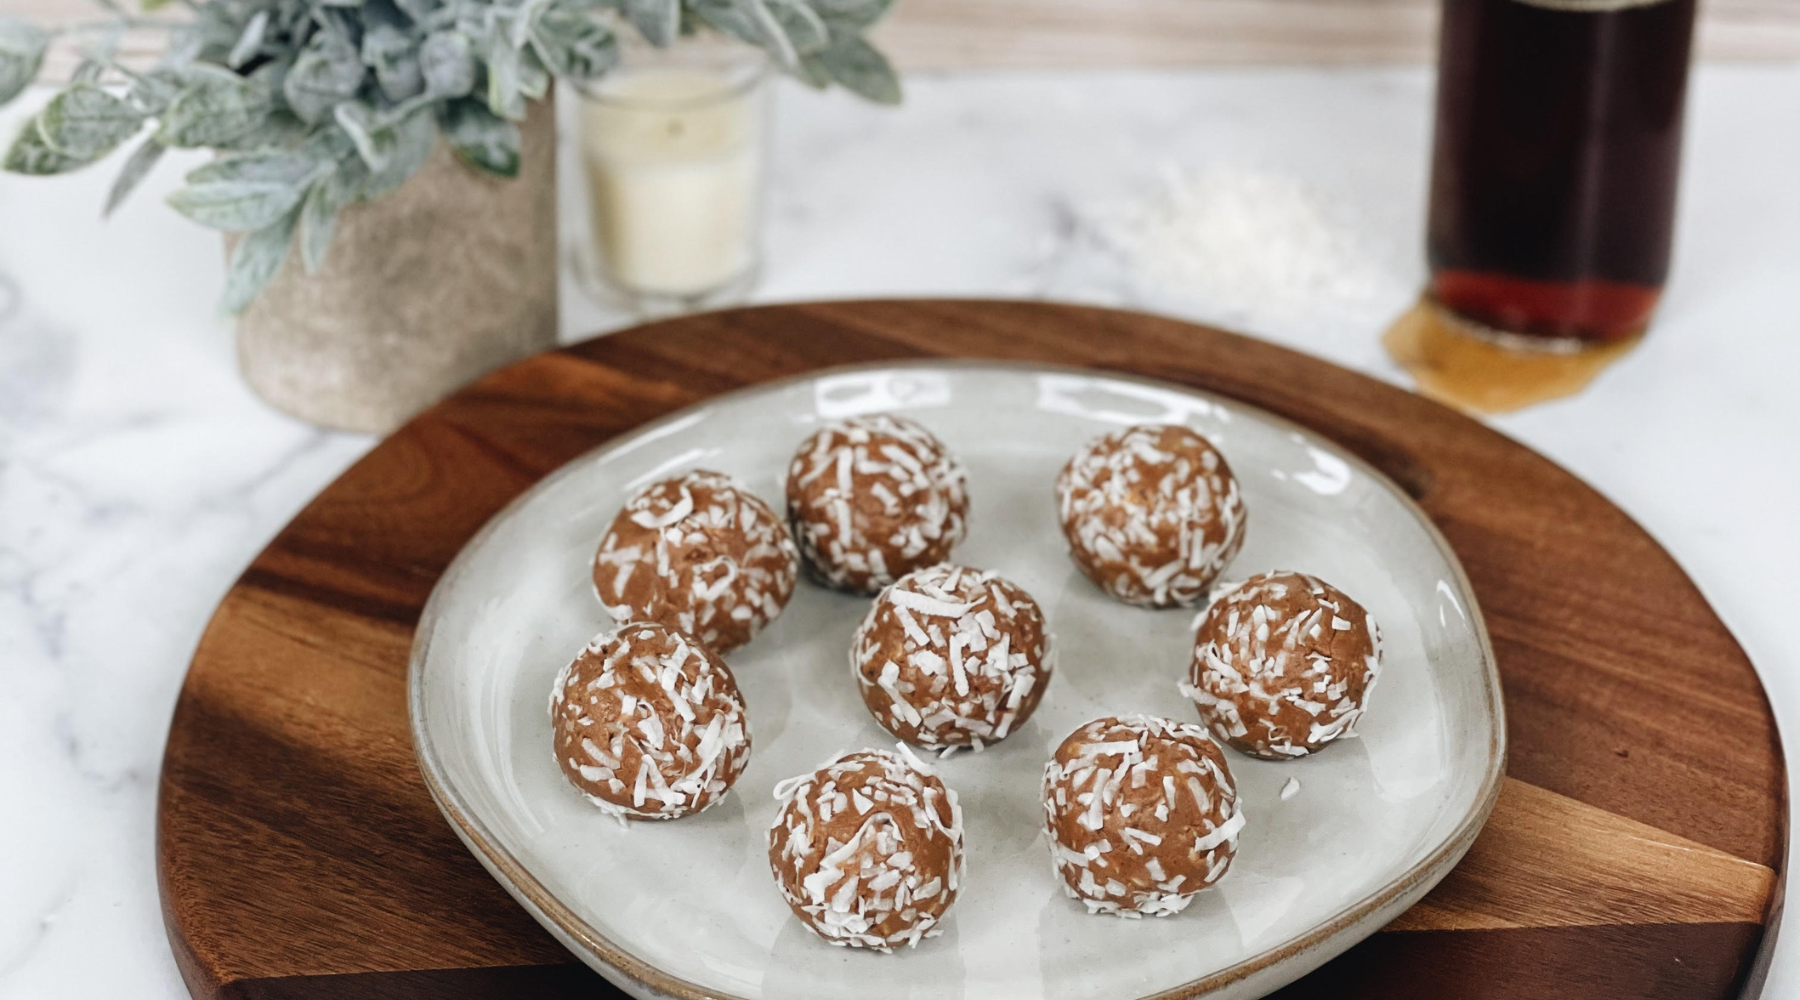 Vegan Chocolate Peanut Butter Balls - The Perfect Energy Boosting Snack